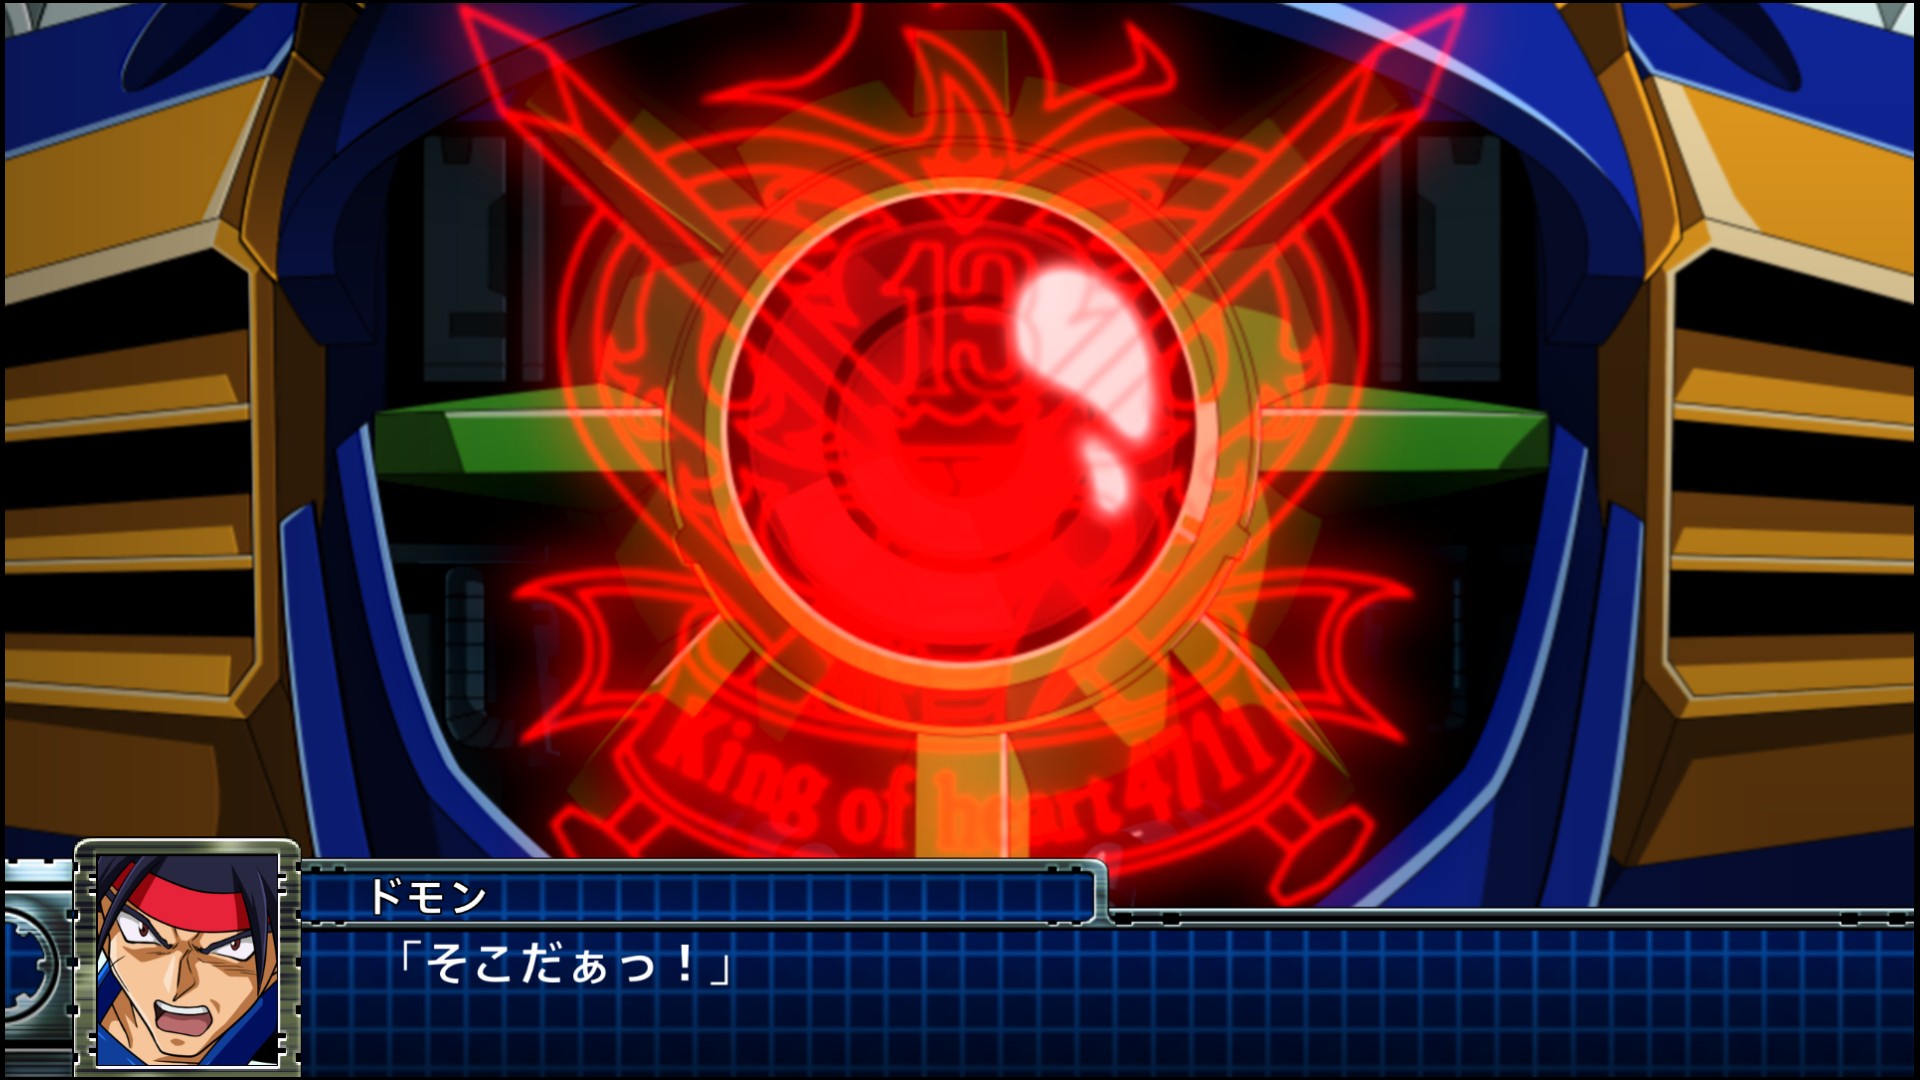 Super Robot Wars T Shows More Characters, Mechs - RPGamer